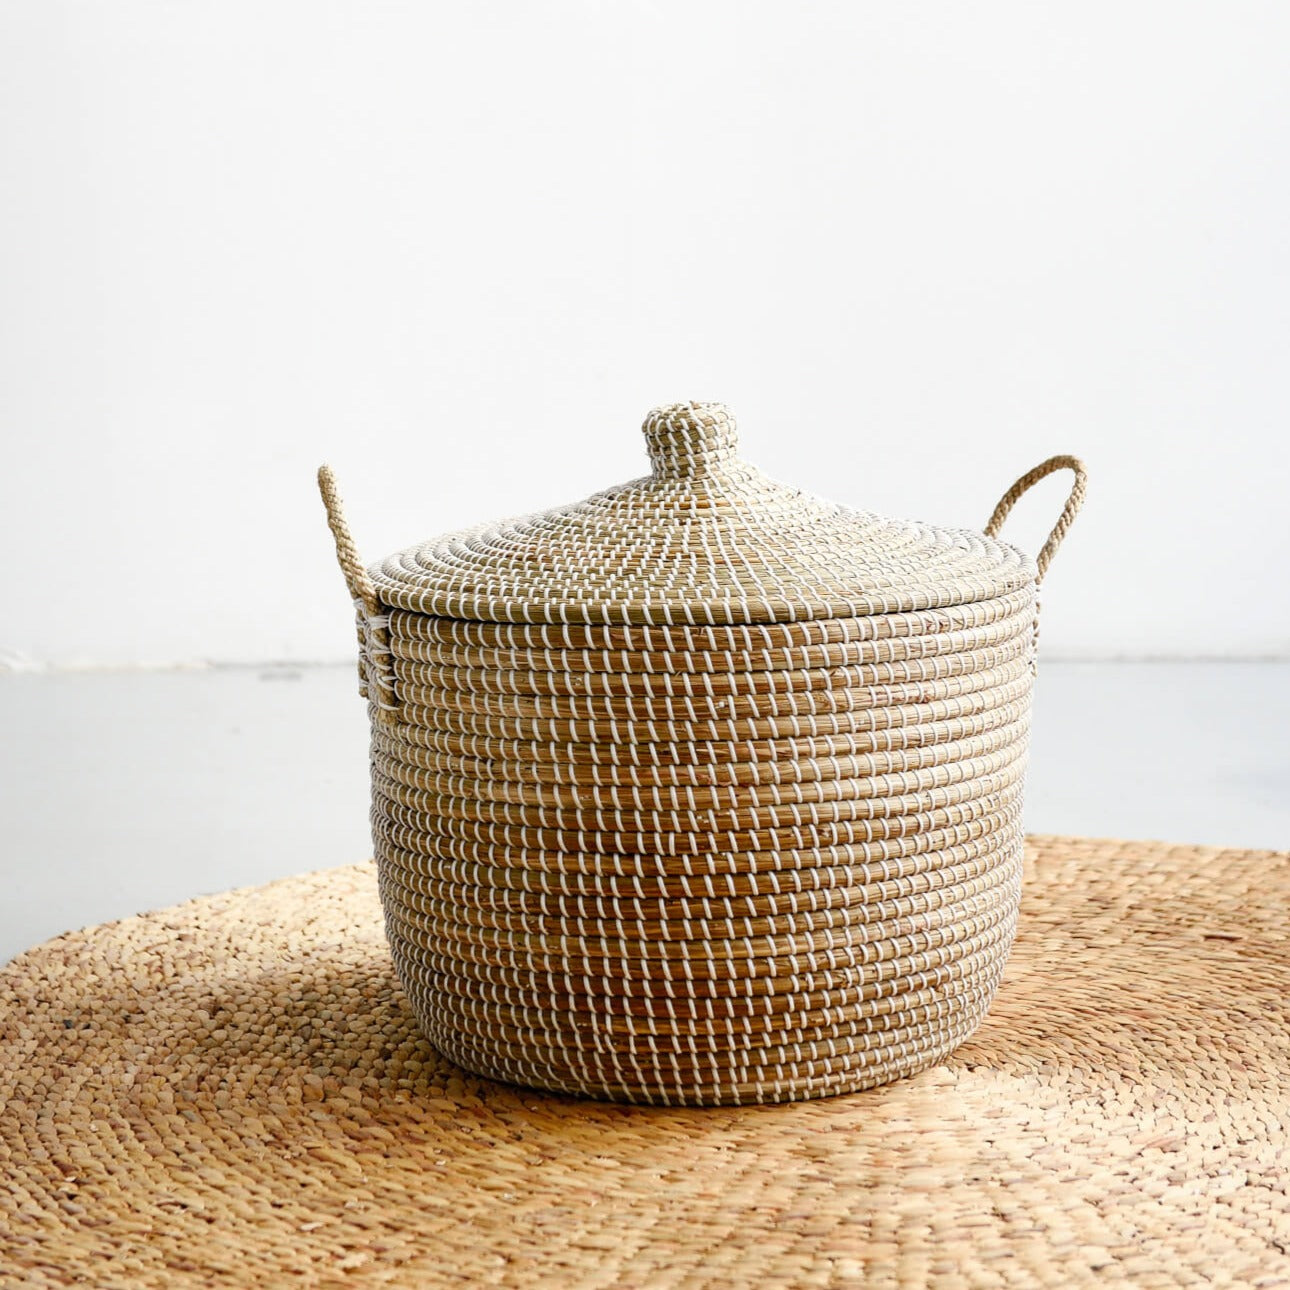 Saigon Seagrass Basket with lid from Vietnam